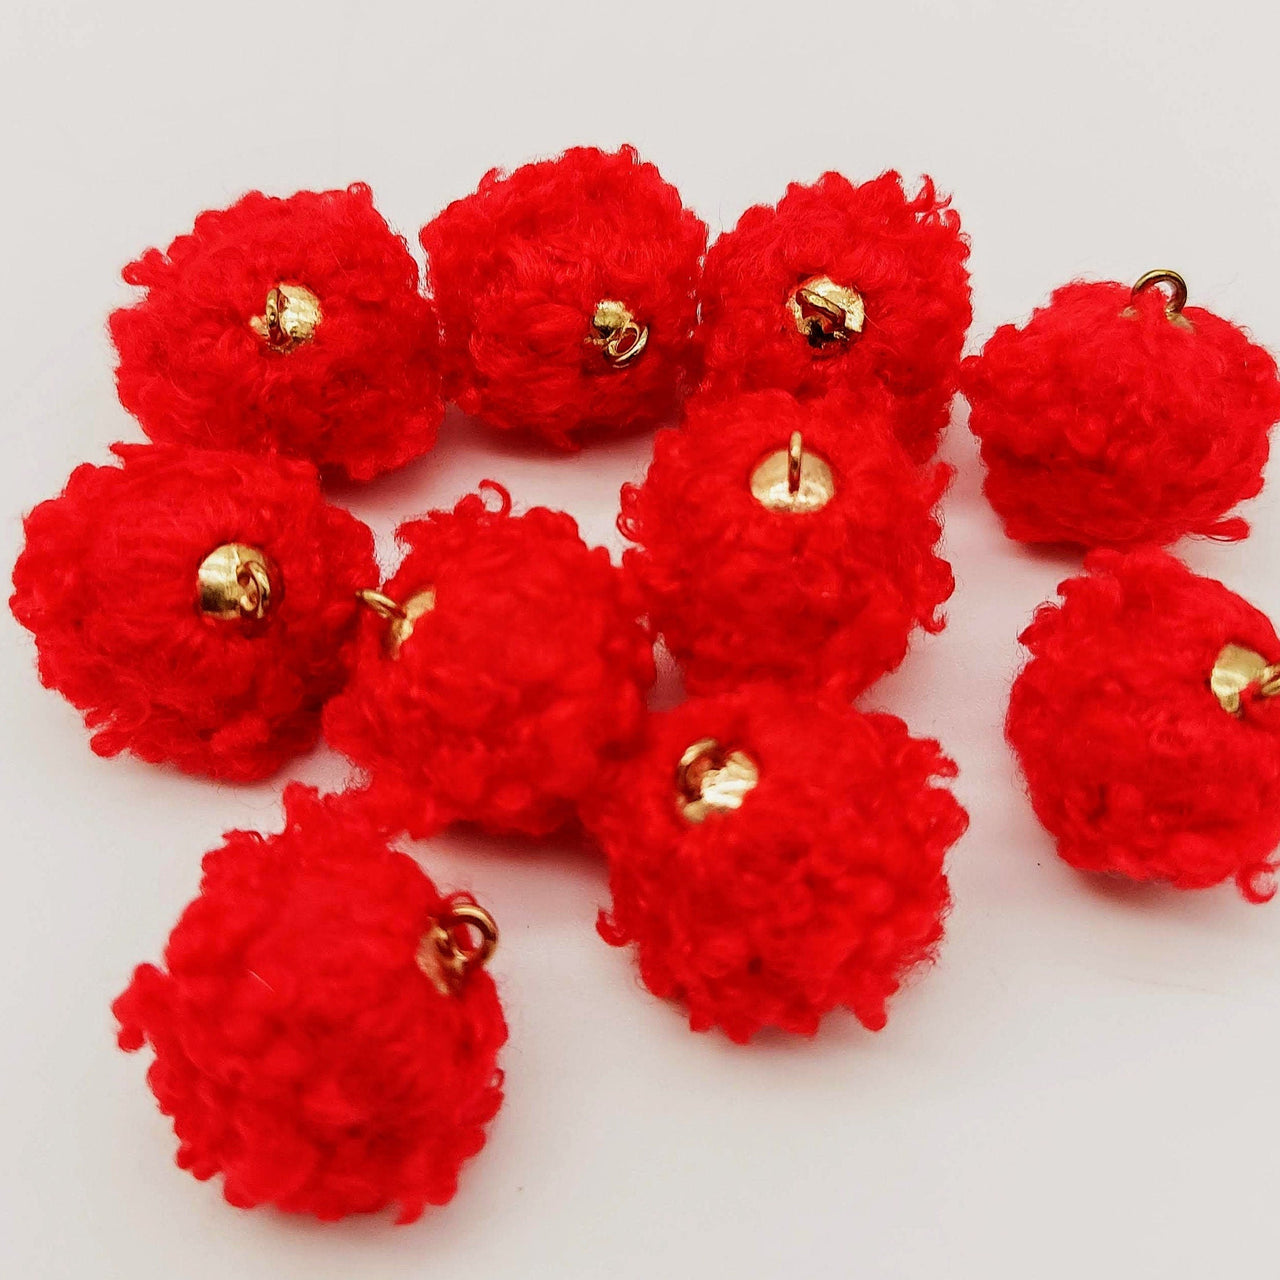 Red Fur Fabric Ball Tassel, Button with Ring Cap, Decorative Tassels